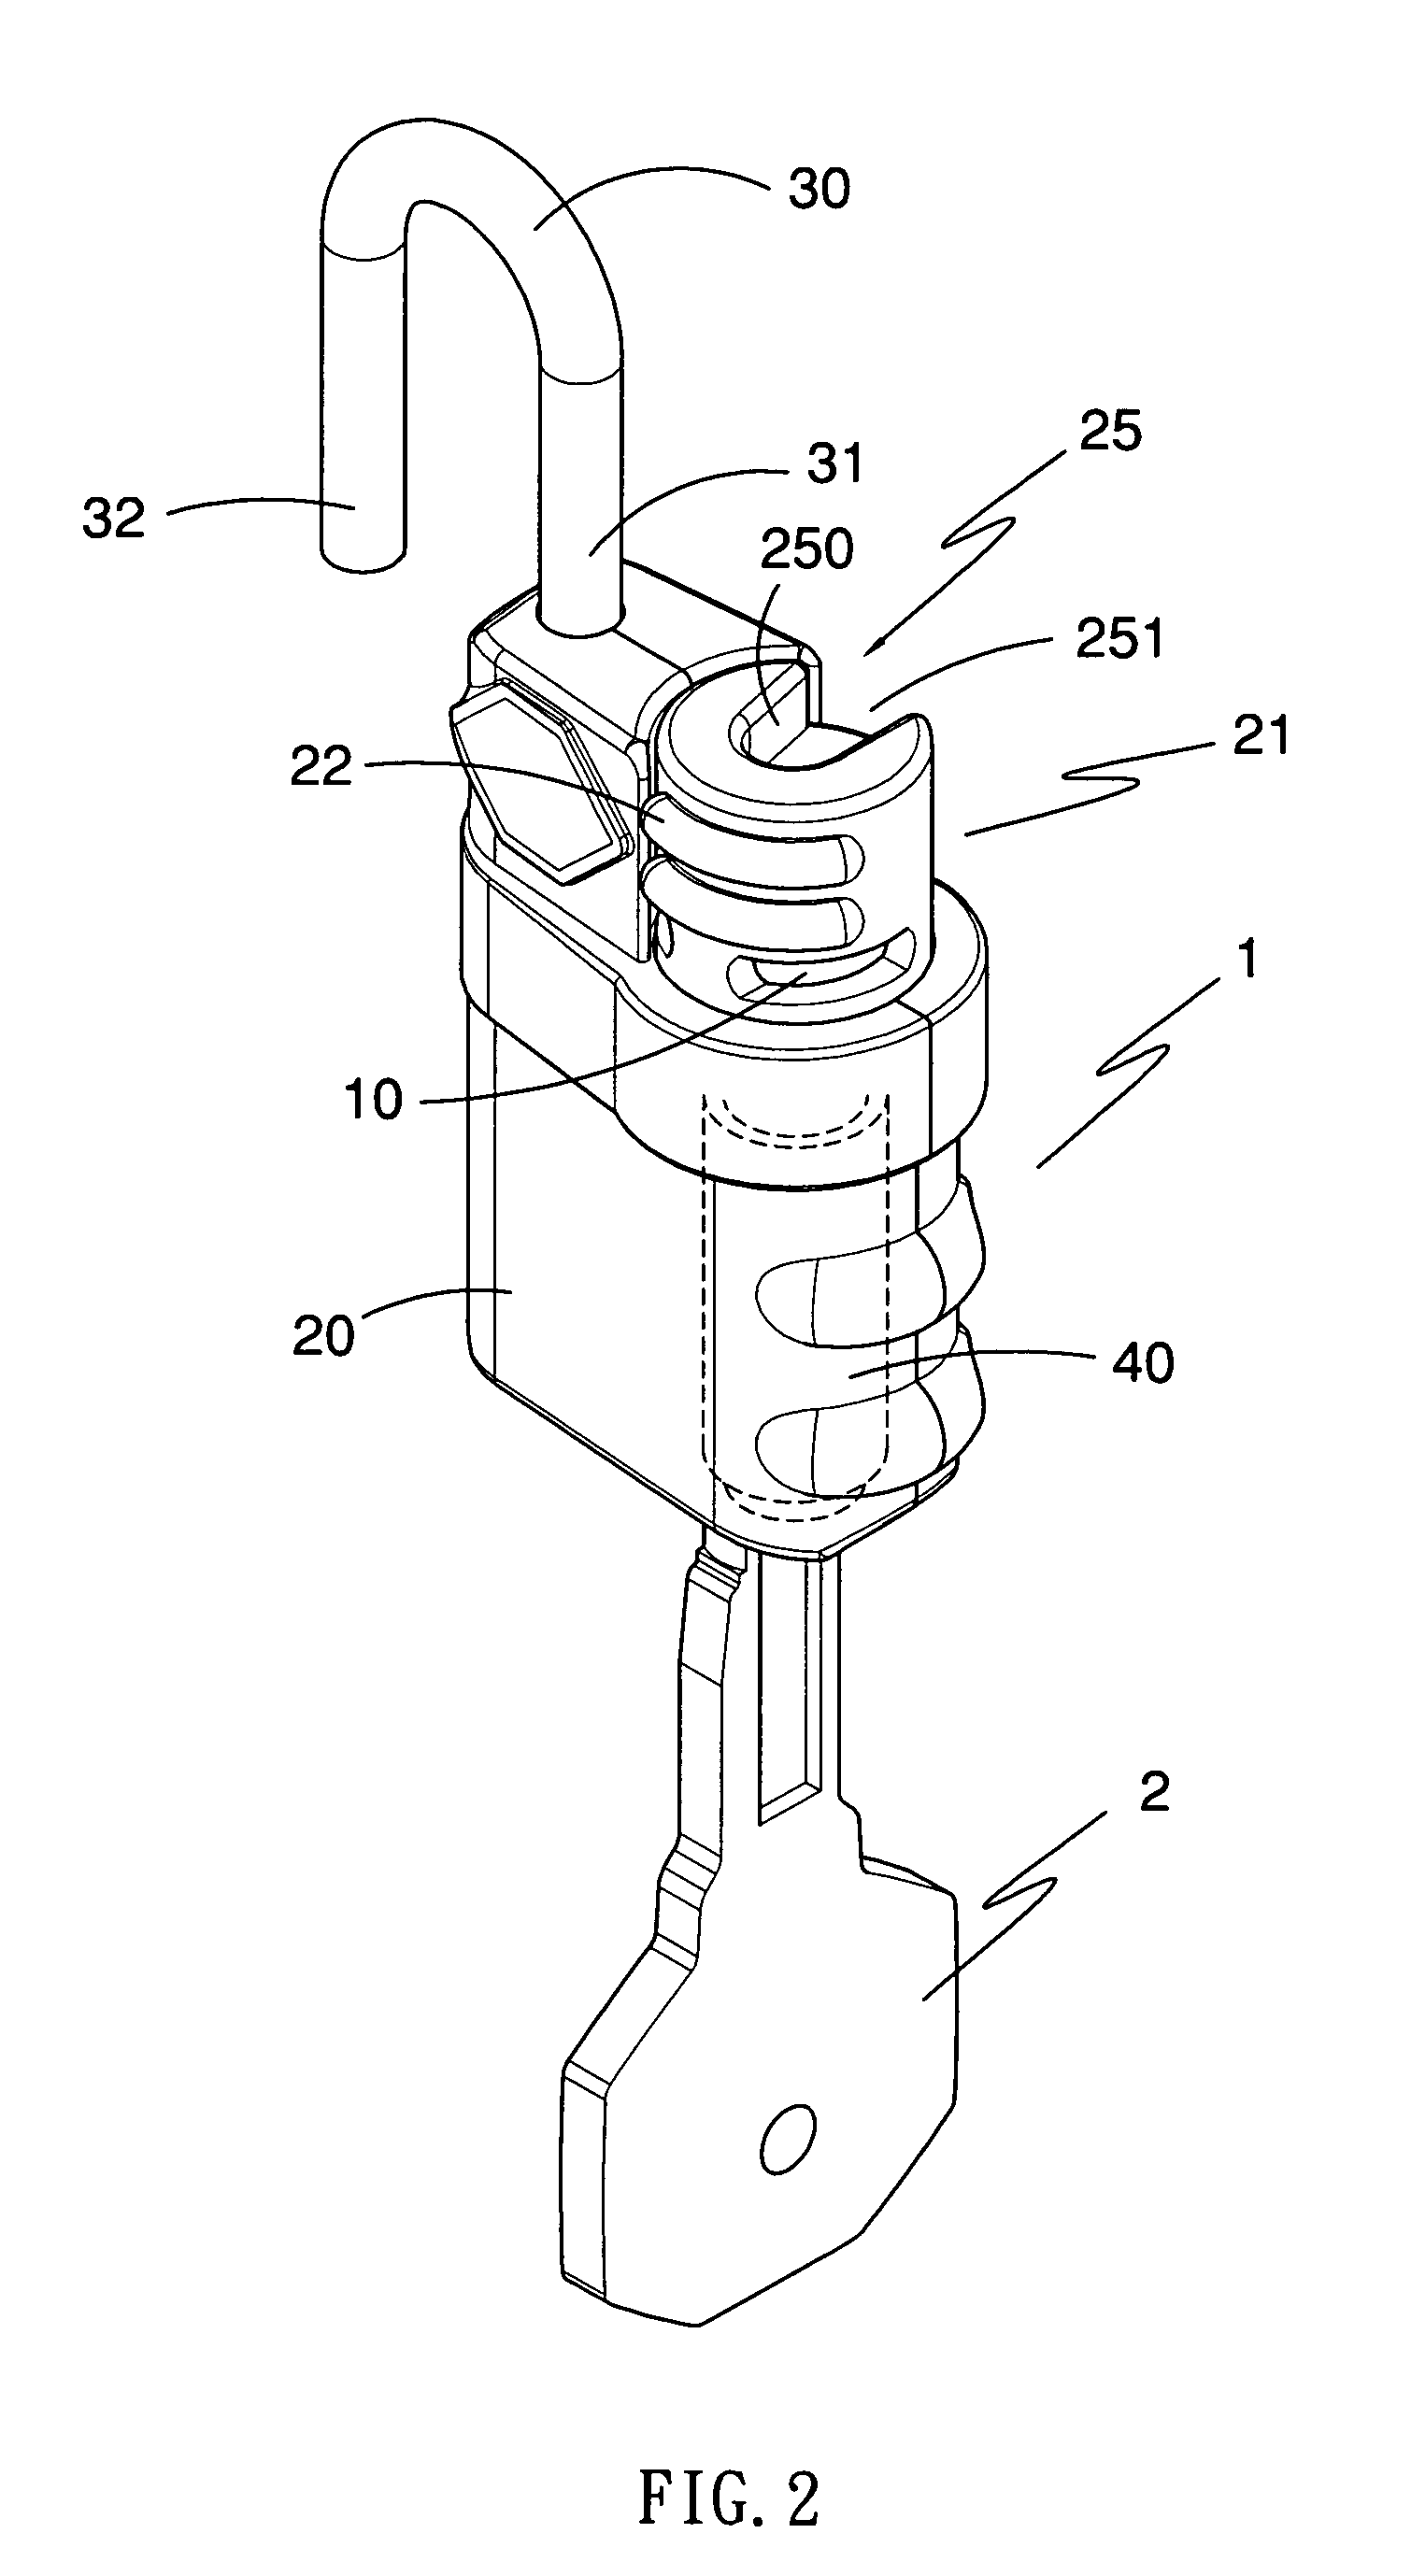 Lock with indicator and multiple key-actuated core